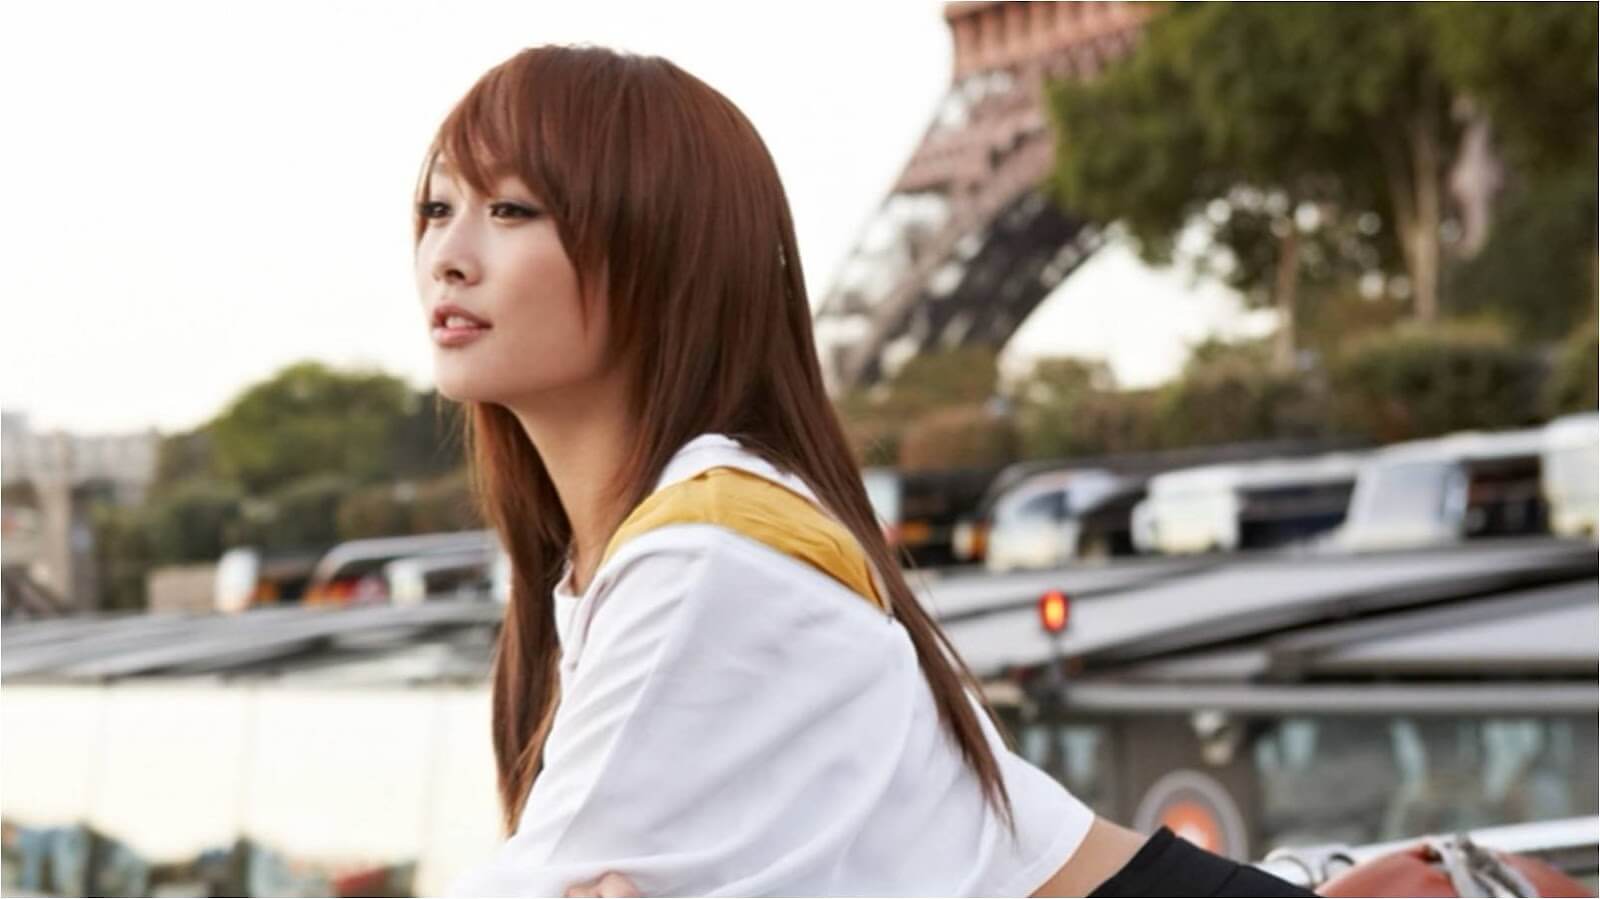 49 Hot Pictures Of Nicole Jung Will Prove That She Is One Of The Sexiest Women Alive | Best Of Comic Books